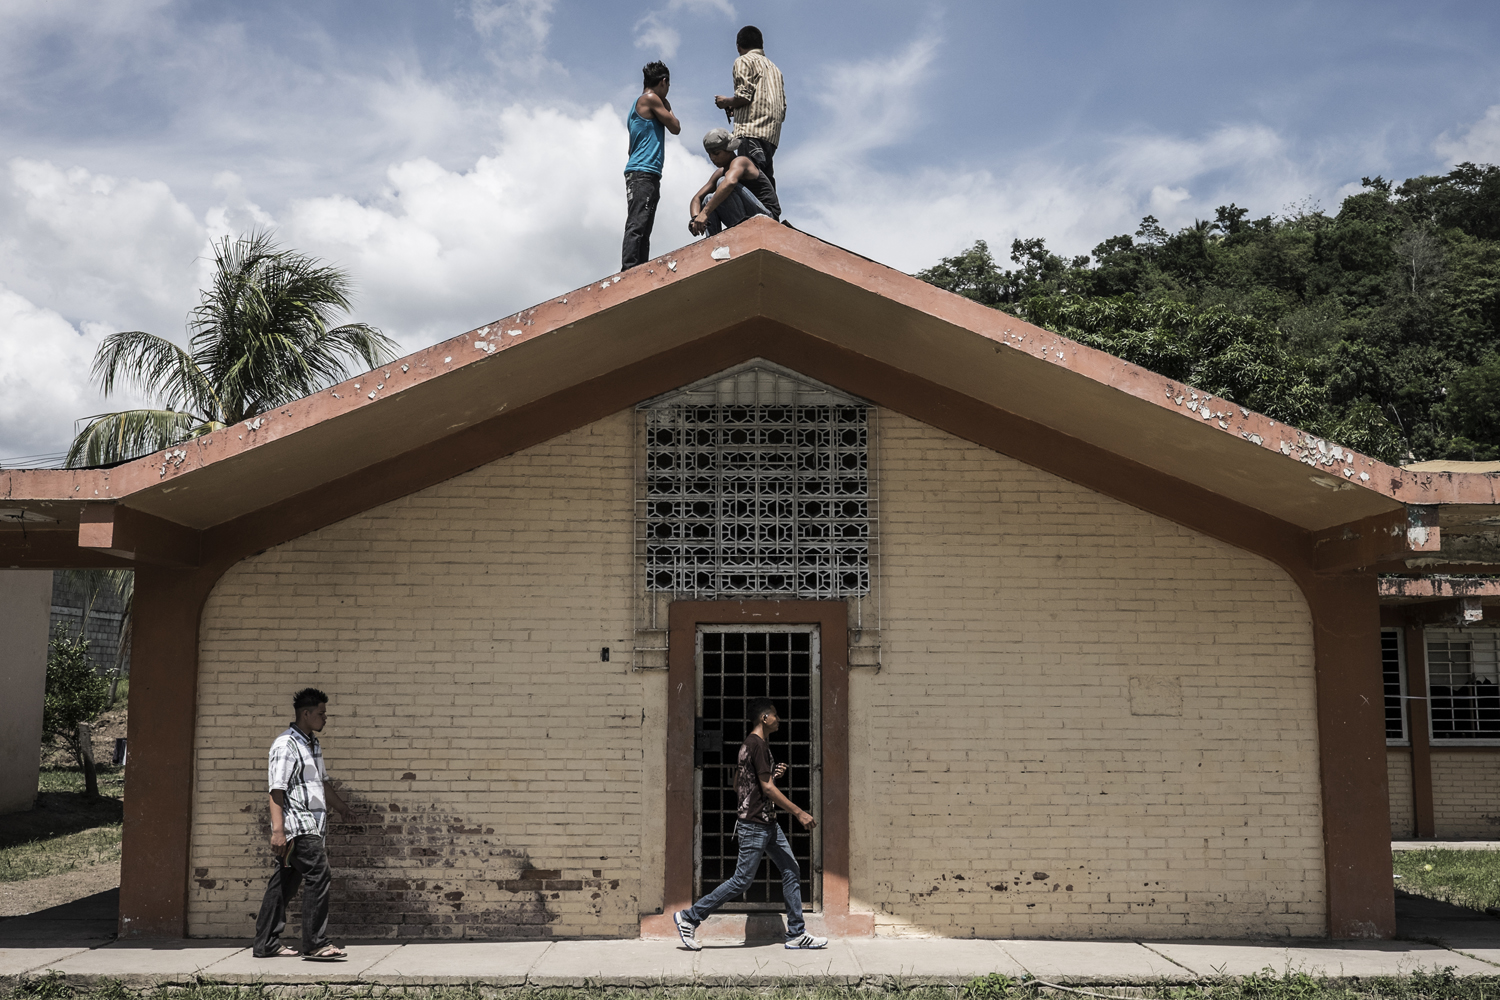 Lookouts keep guard on the roof of the youth detention center in San Pedro Sula. Honduras. July 18, 2014.